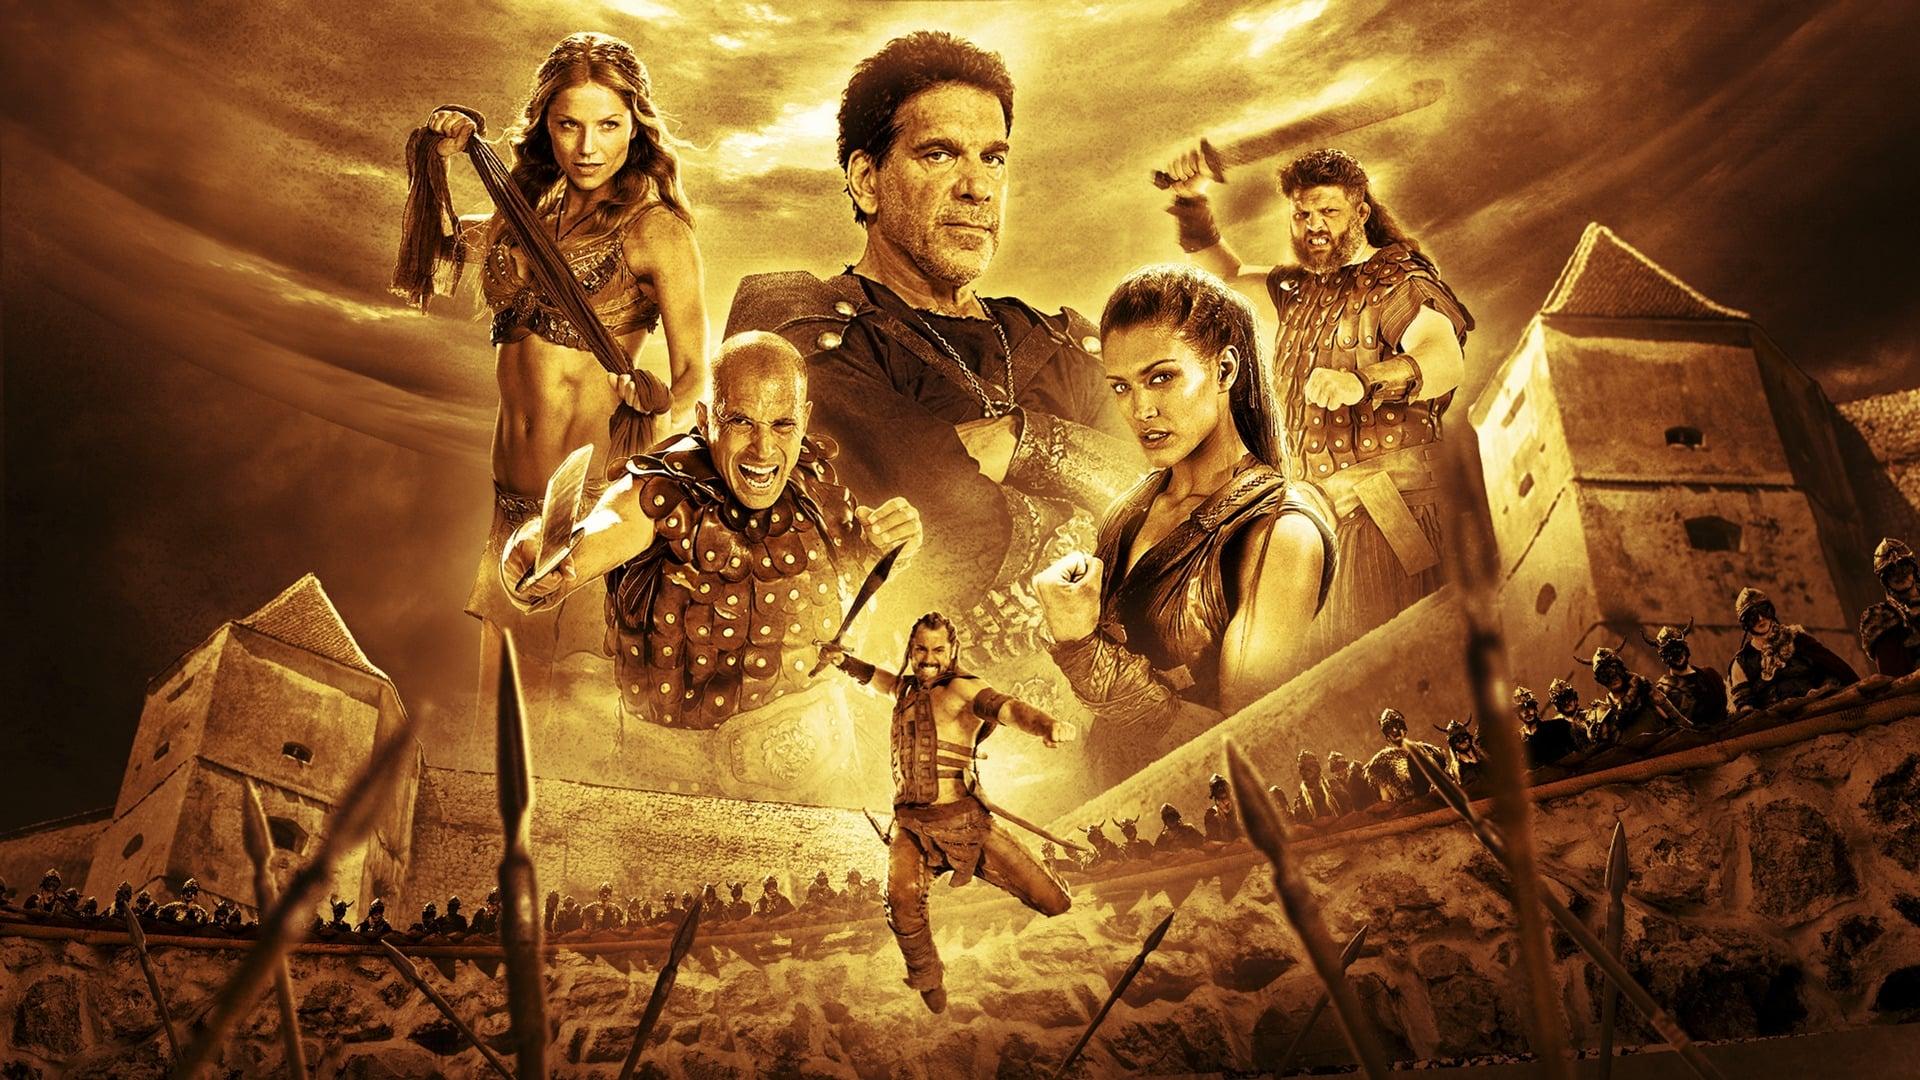 The Scorpion King 4: Quest for Power backdrop